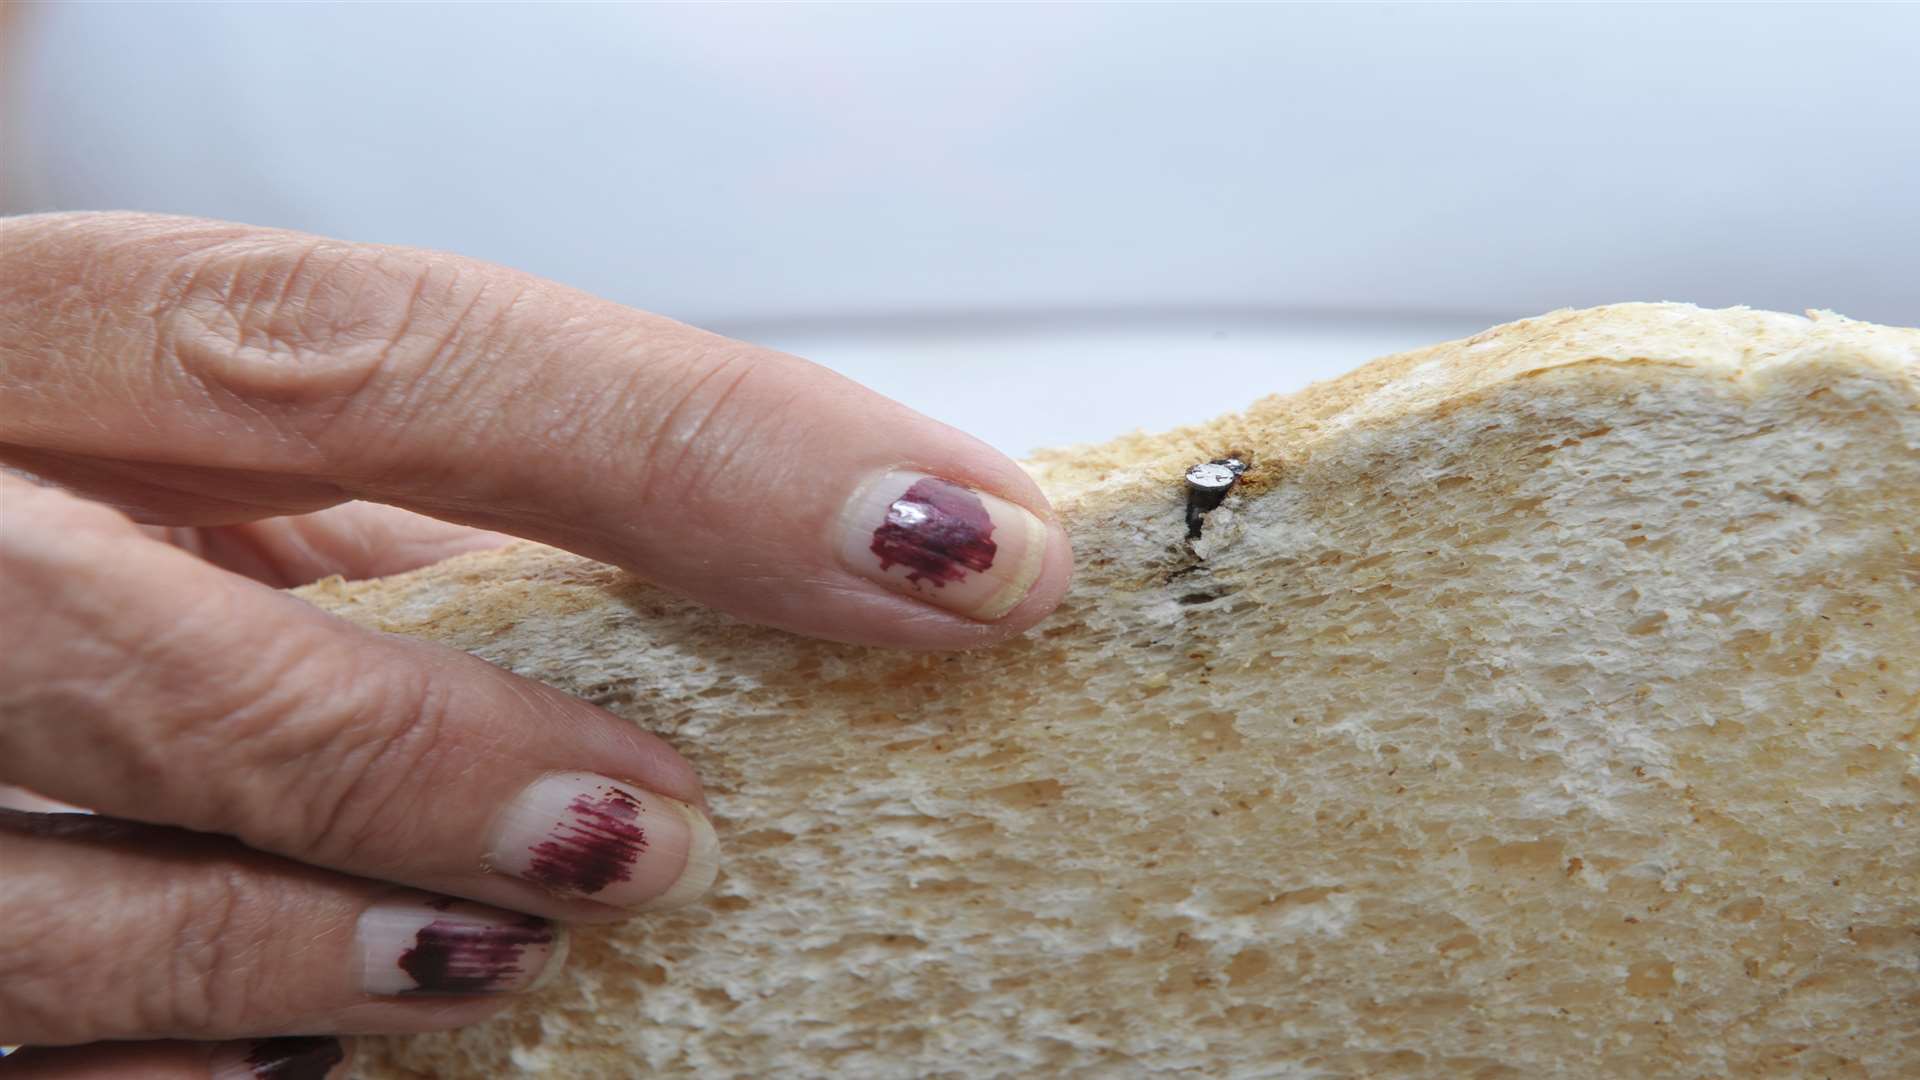 The nails were found in loaf of bread. Picture: Tony Flashman